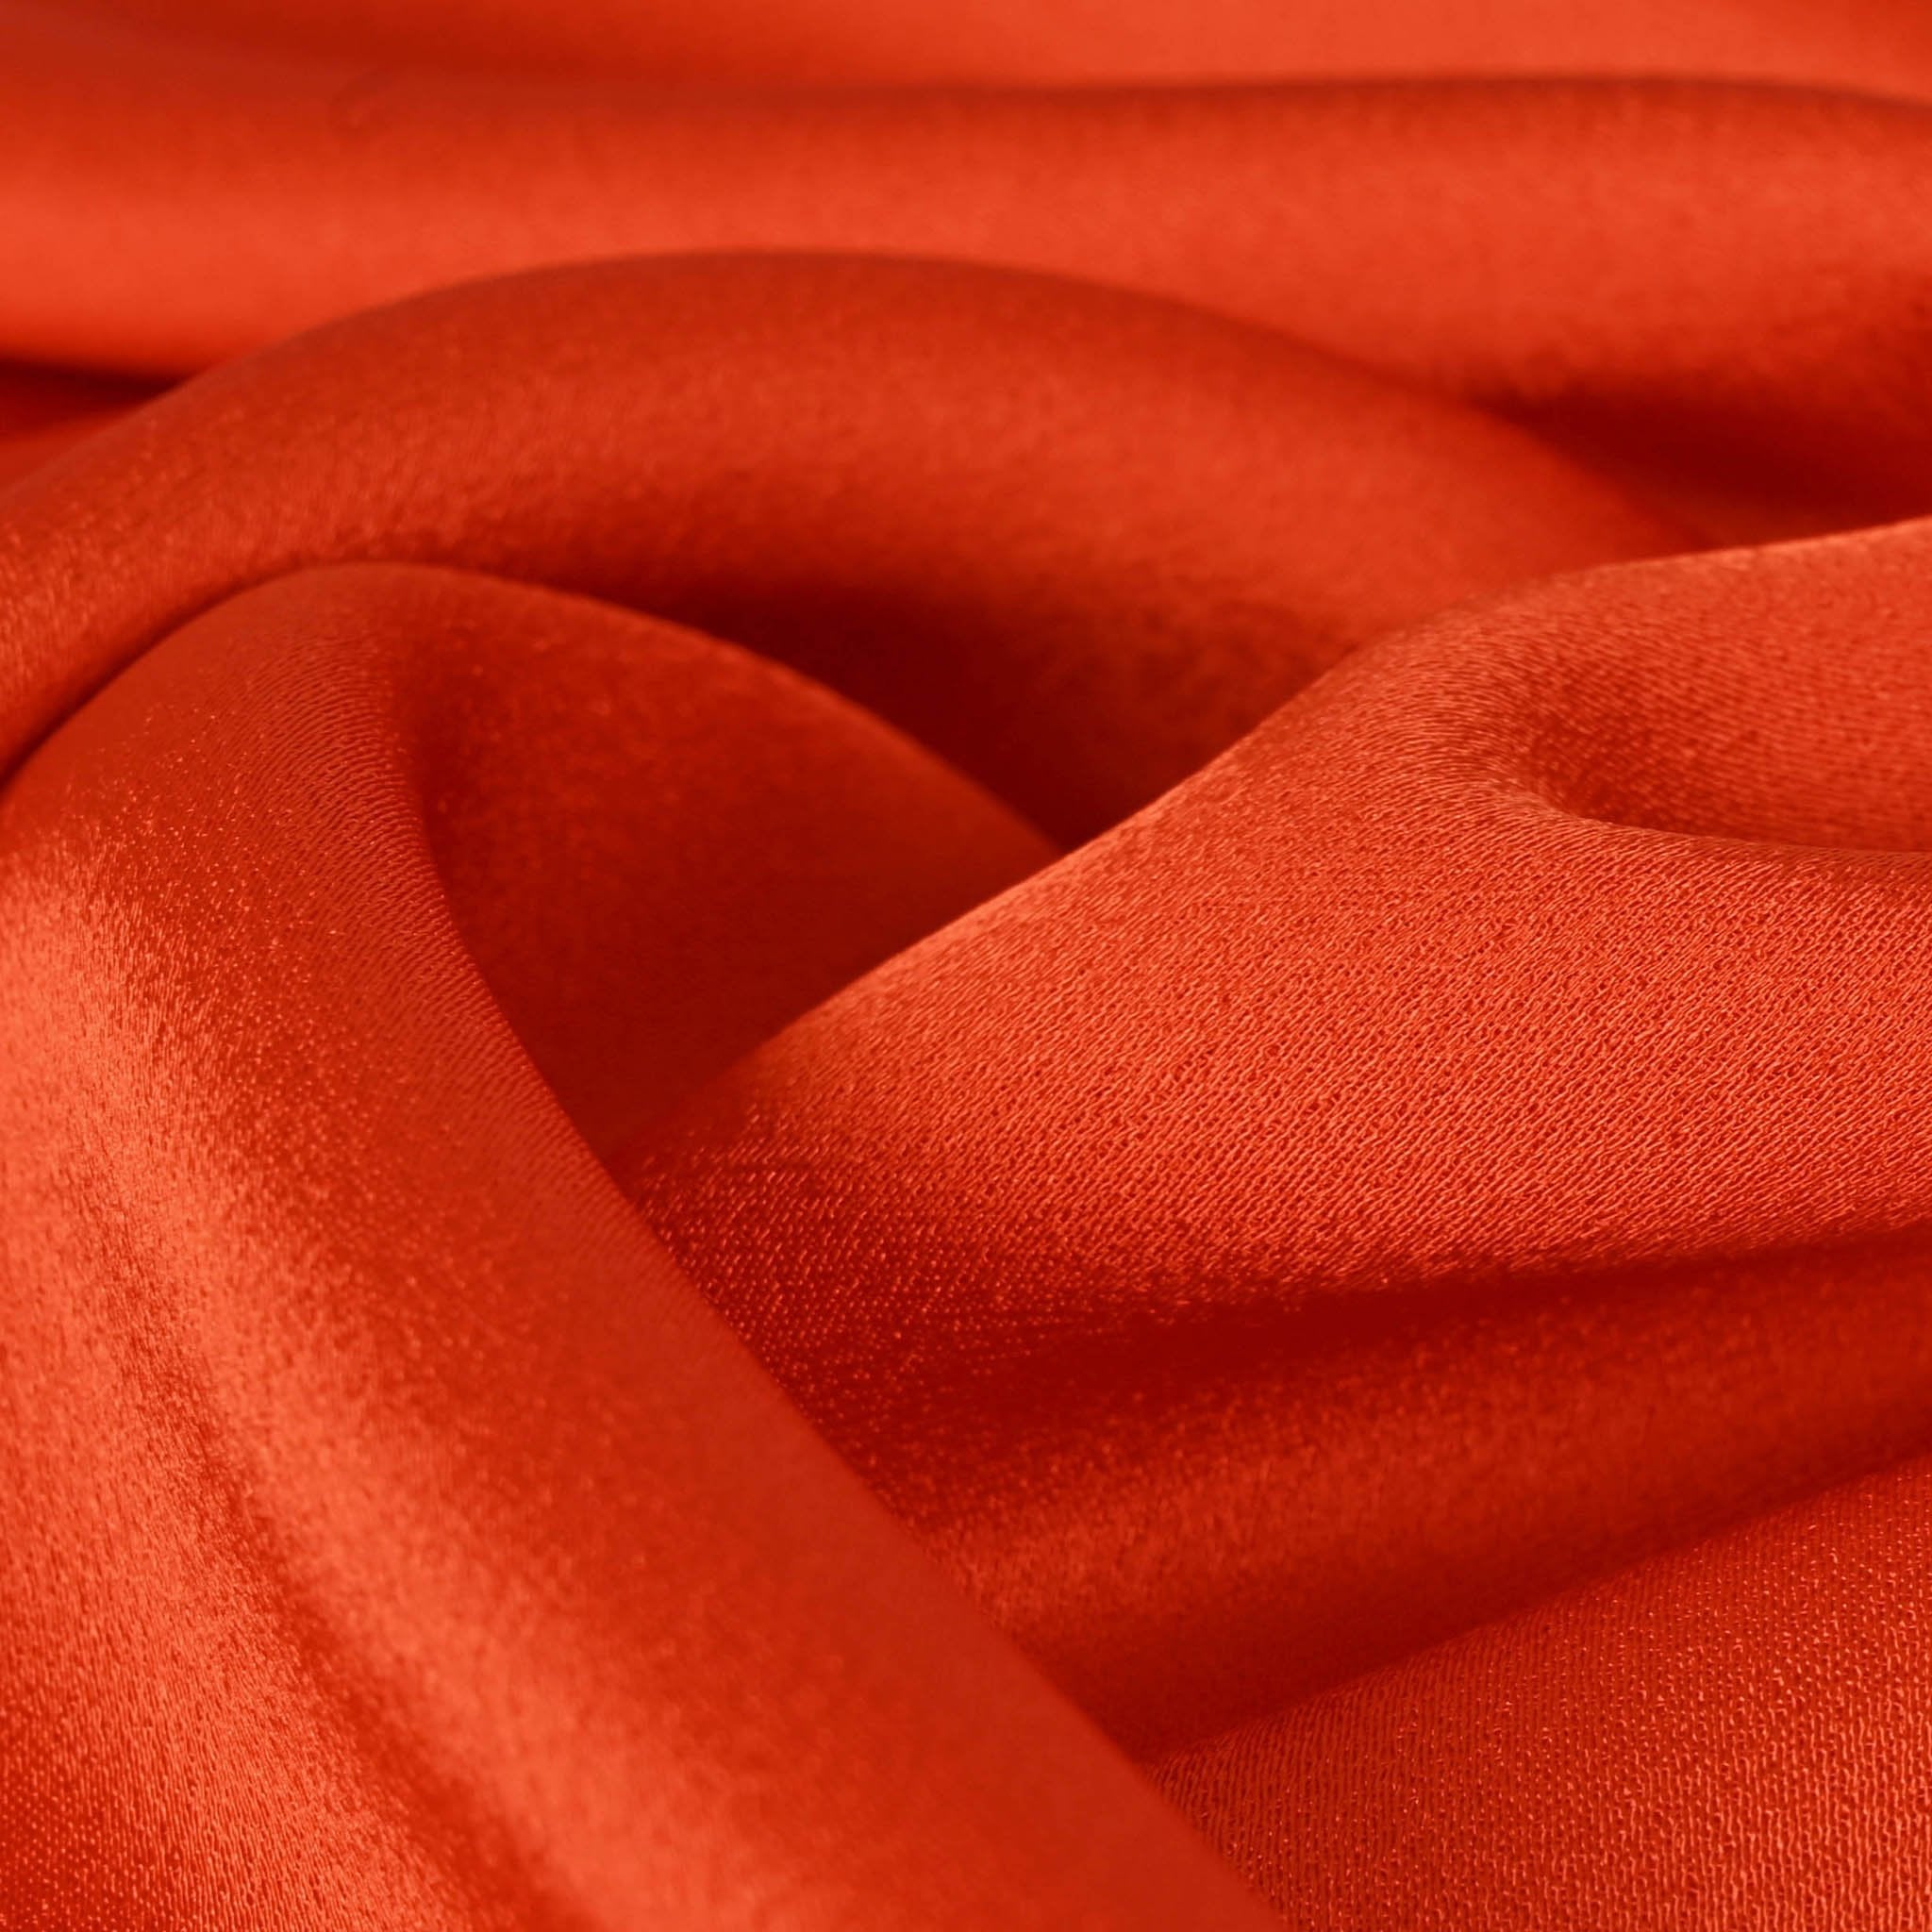 Red satin-backed 100% silk crepe fabric